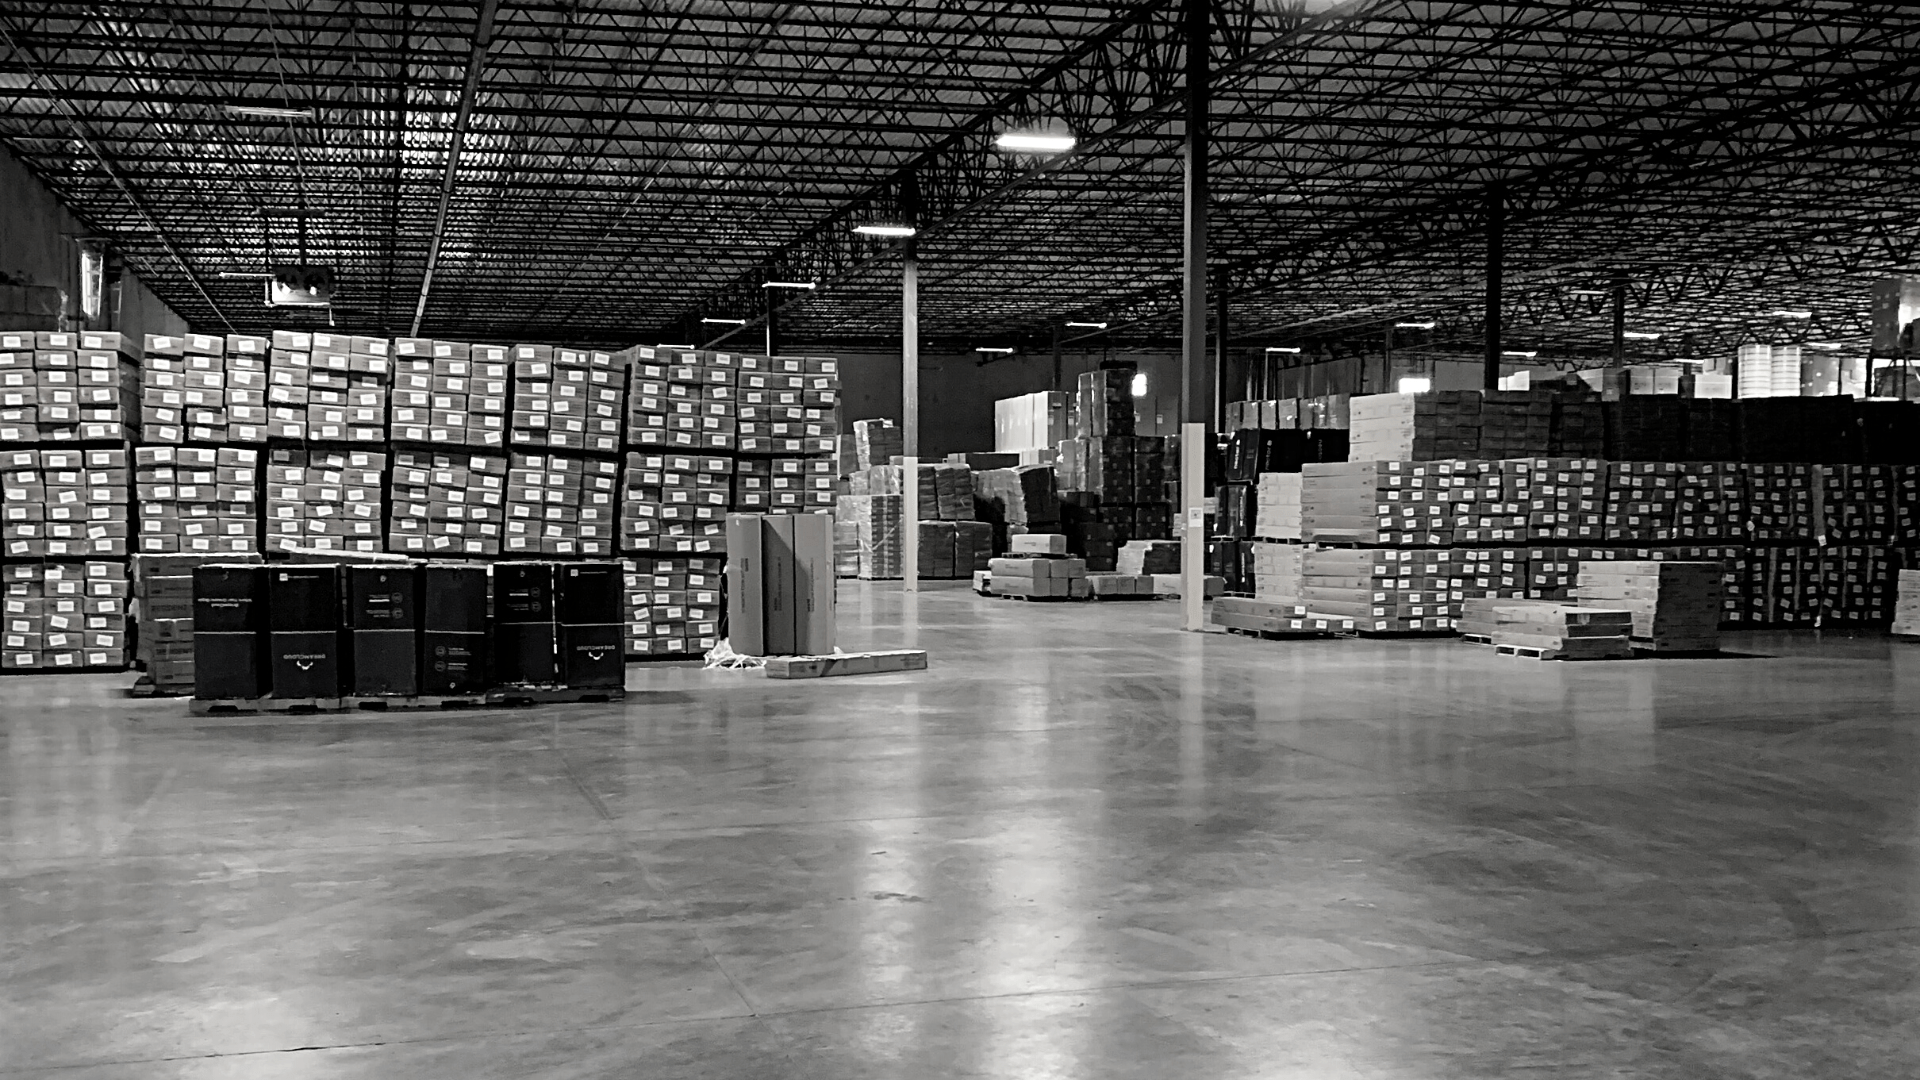 A picture that shows the loading dock area of the MVP Logistics Houston warehouse and fulfillment center.